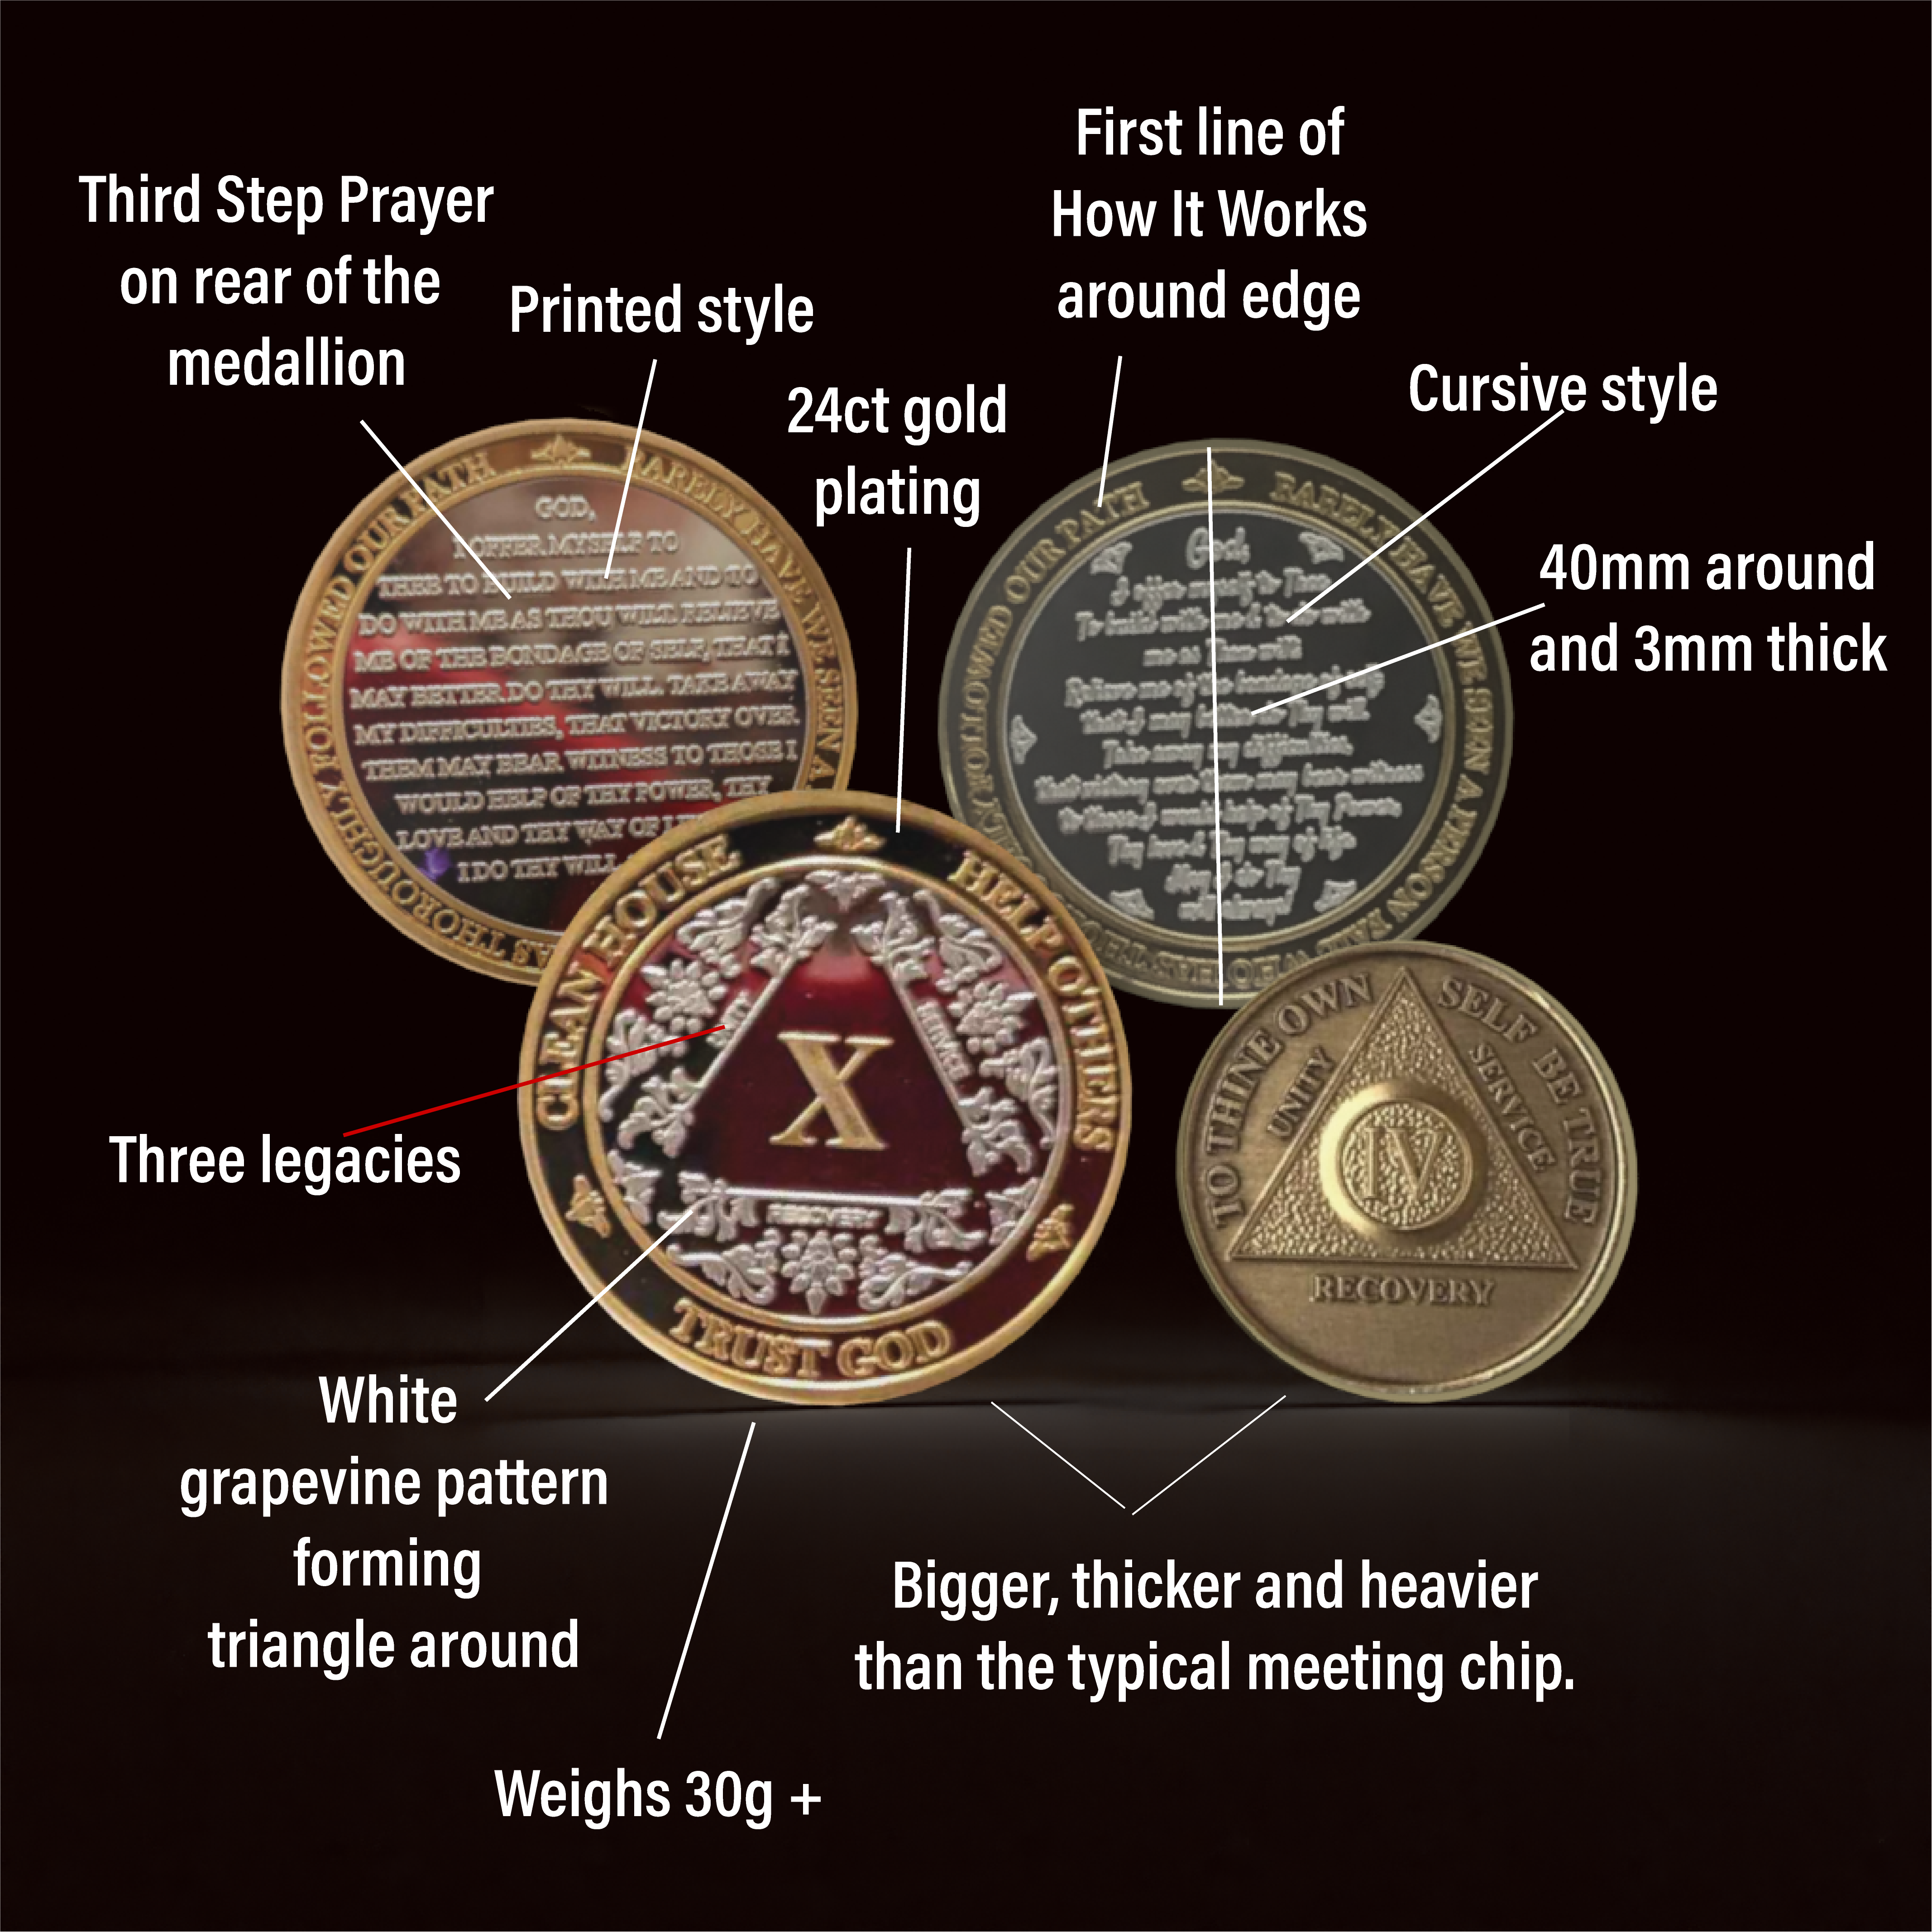 (3-PACK) Pick Any 3 years...Silver & Gold Medallion... Pick Your 3 Years